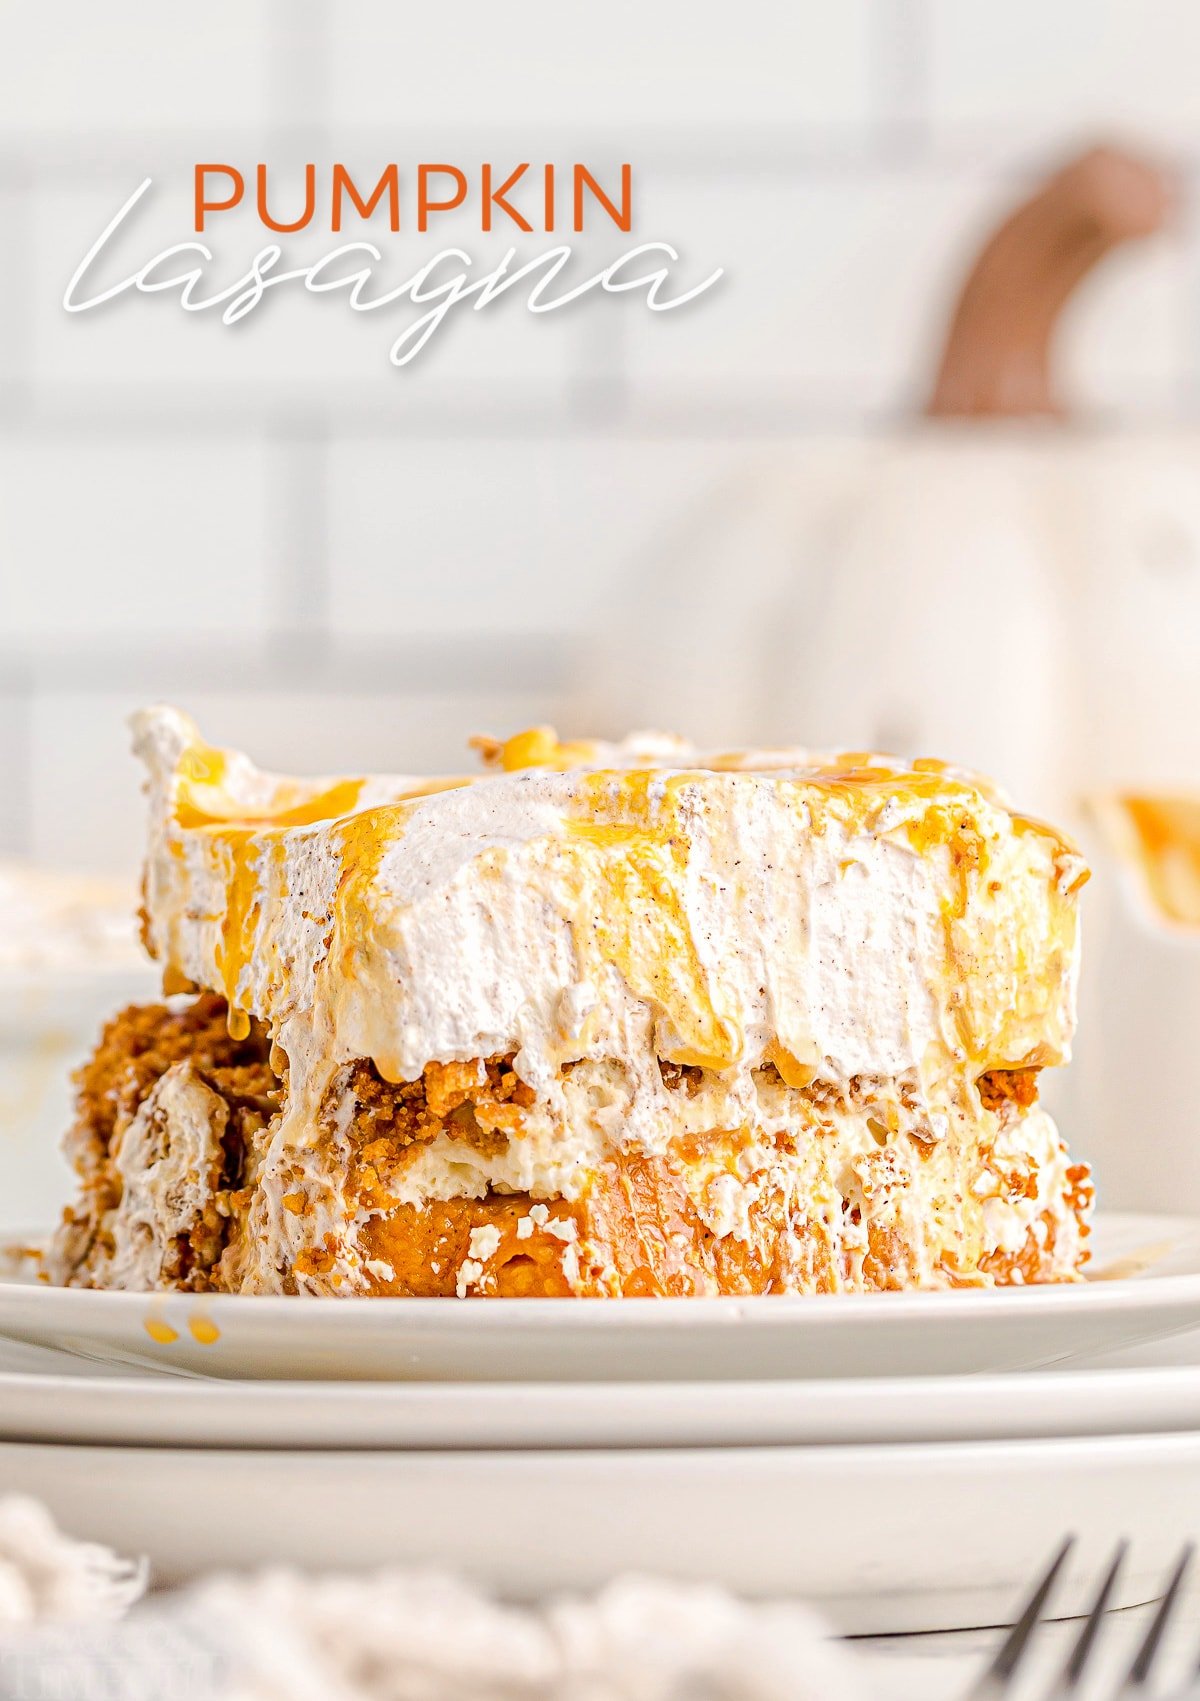 pumpkin dessert sitting on white plates with caramel sauce drizzled over the top and text overlay at the top of the image